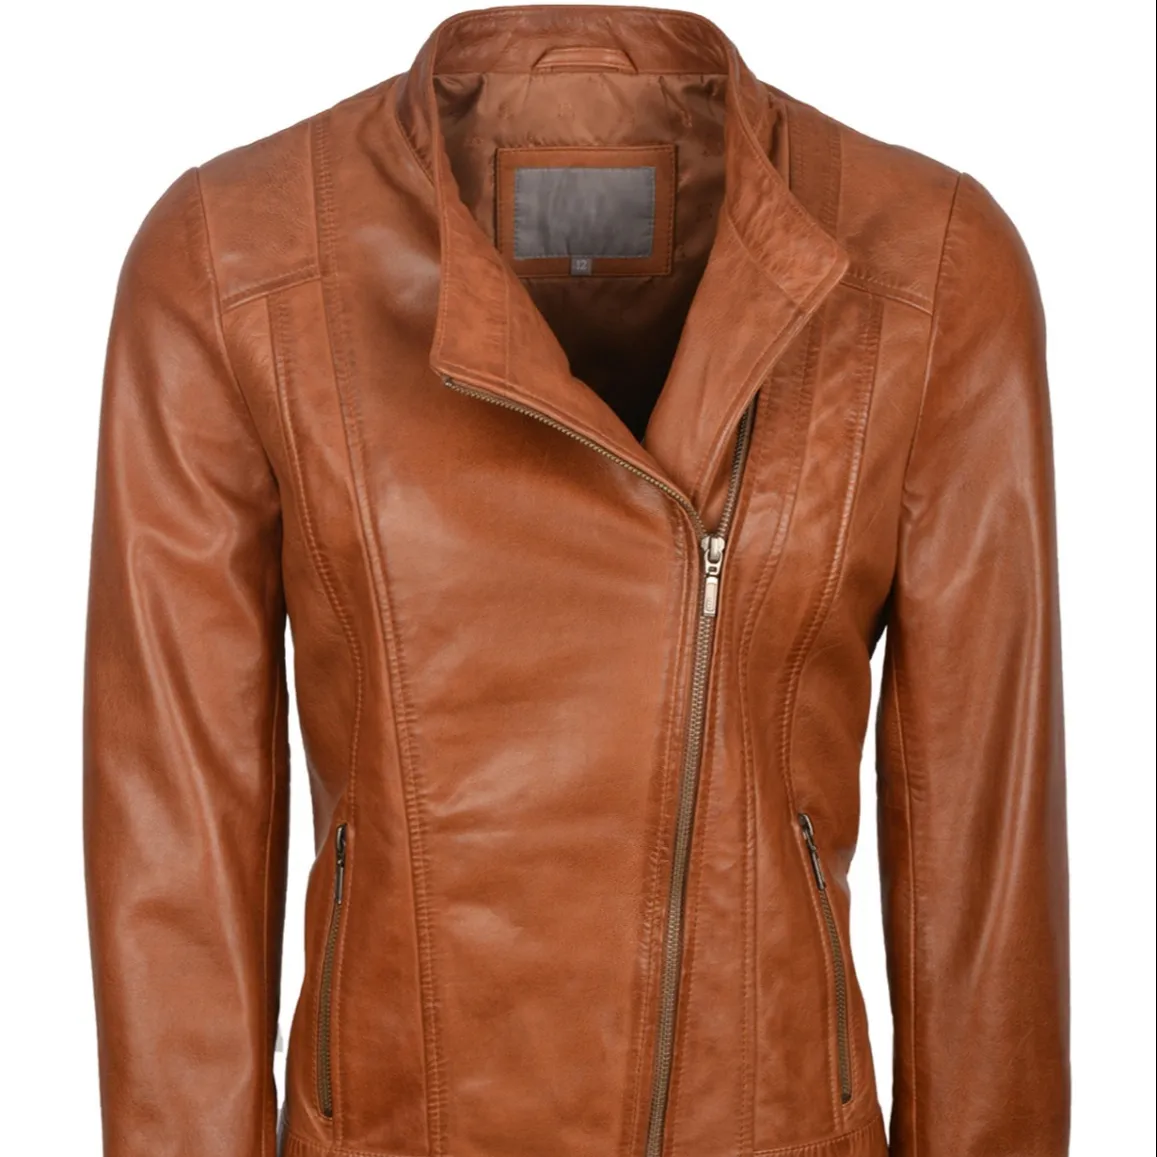 Popular European And American Brown Color Leather Jackets Winter Ladies Top Quality Women's Jackets By Maximize Wear